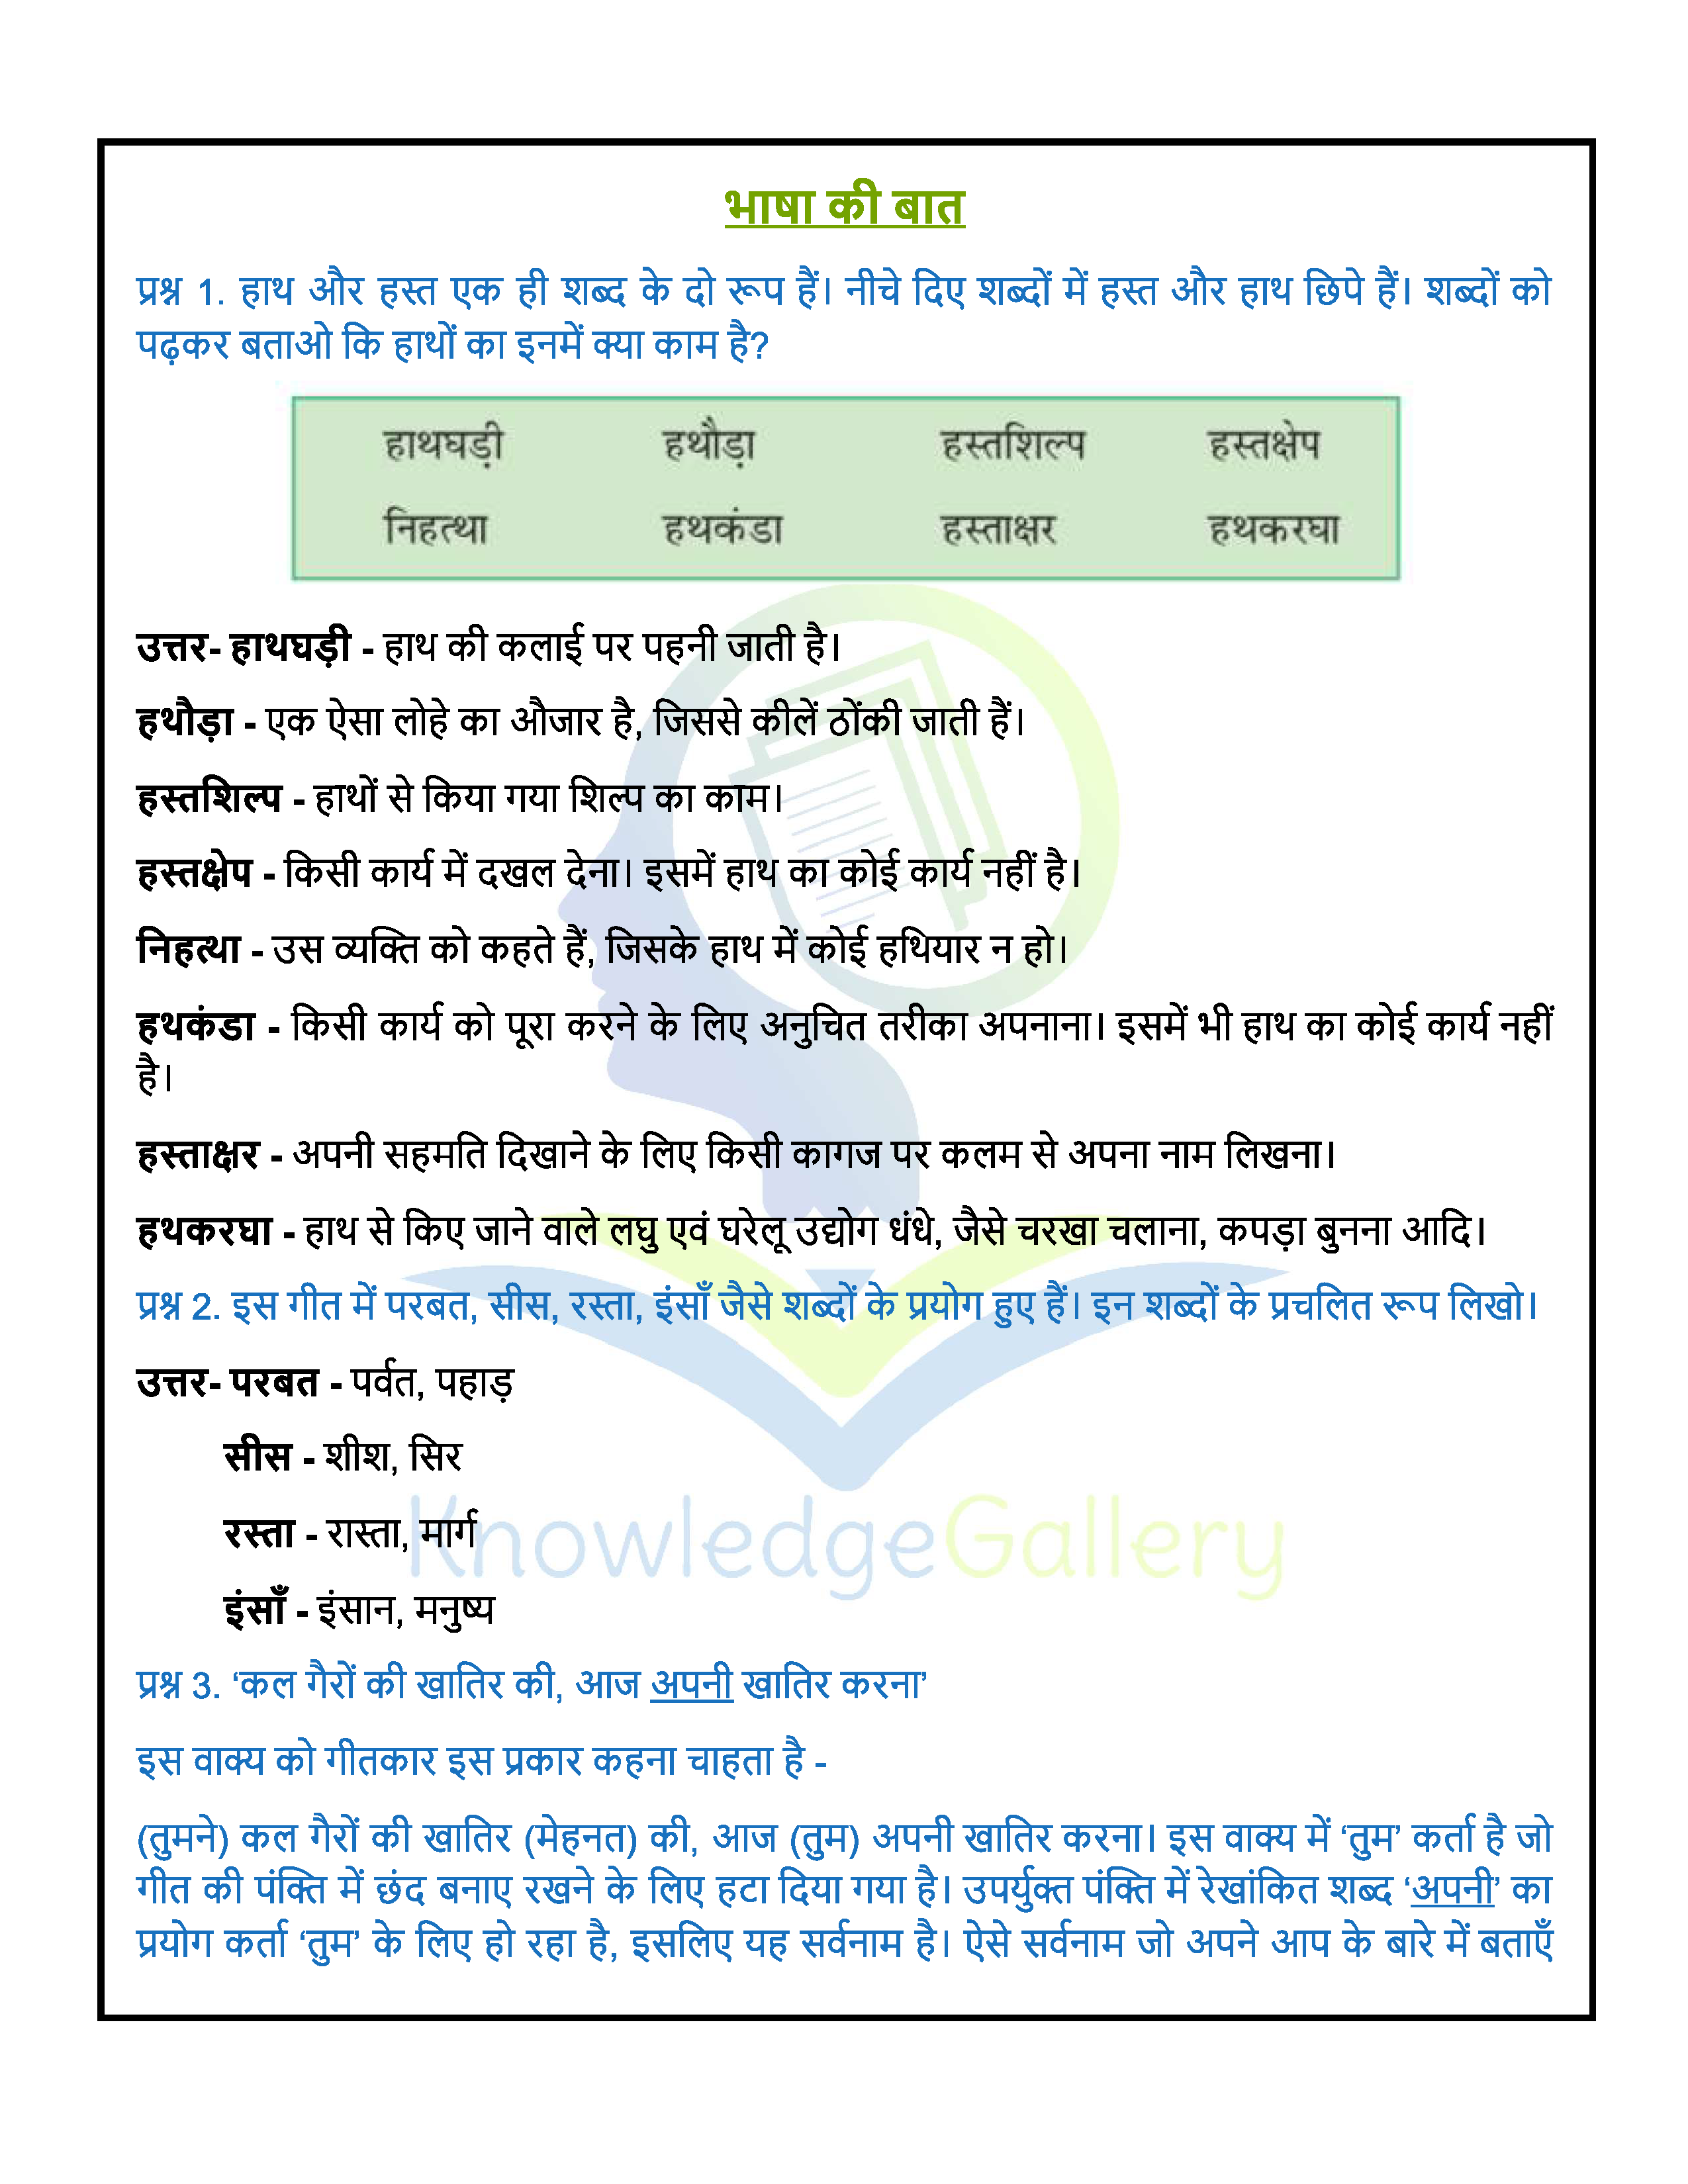 NCERT Solution For Class 6 Hindi Chapter 7 part 6